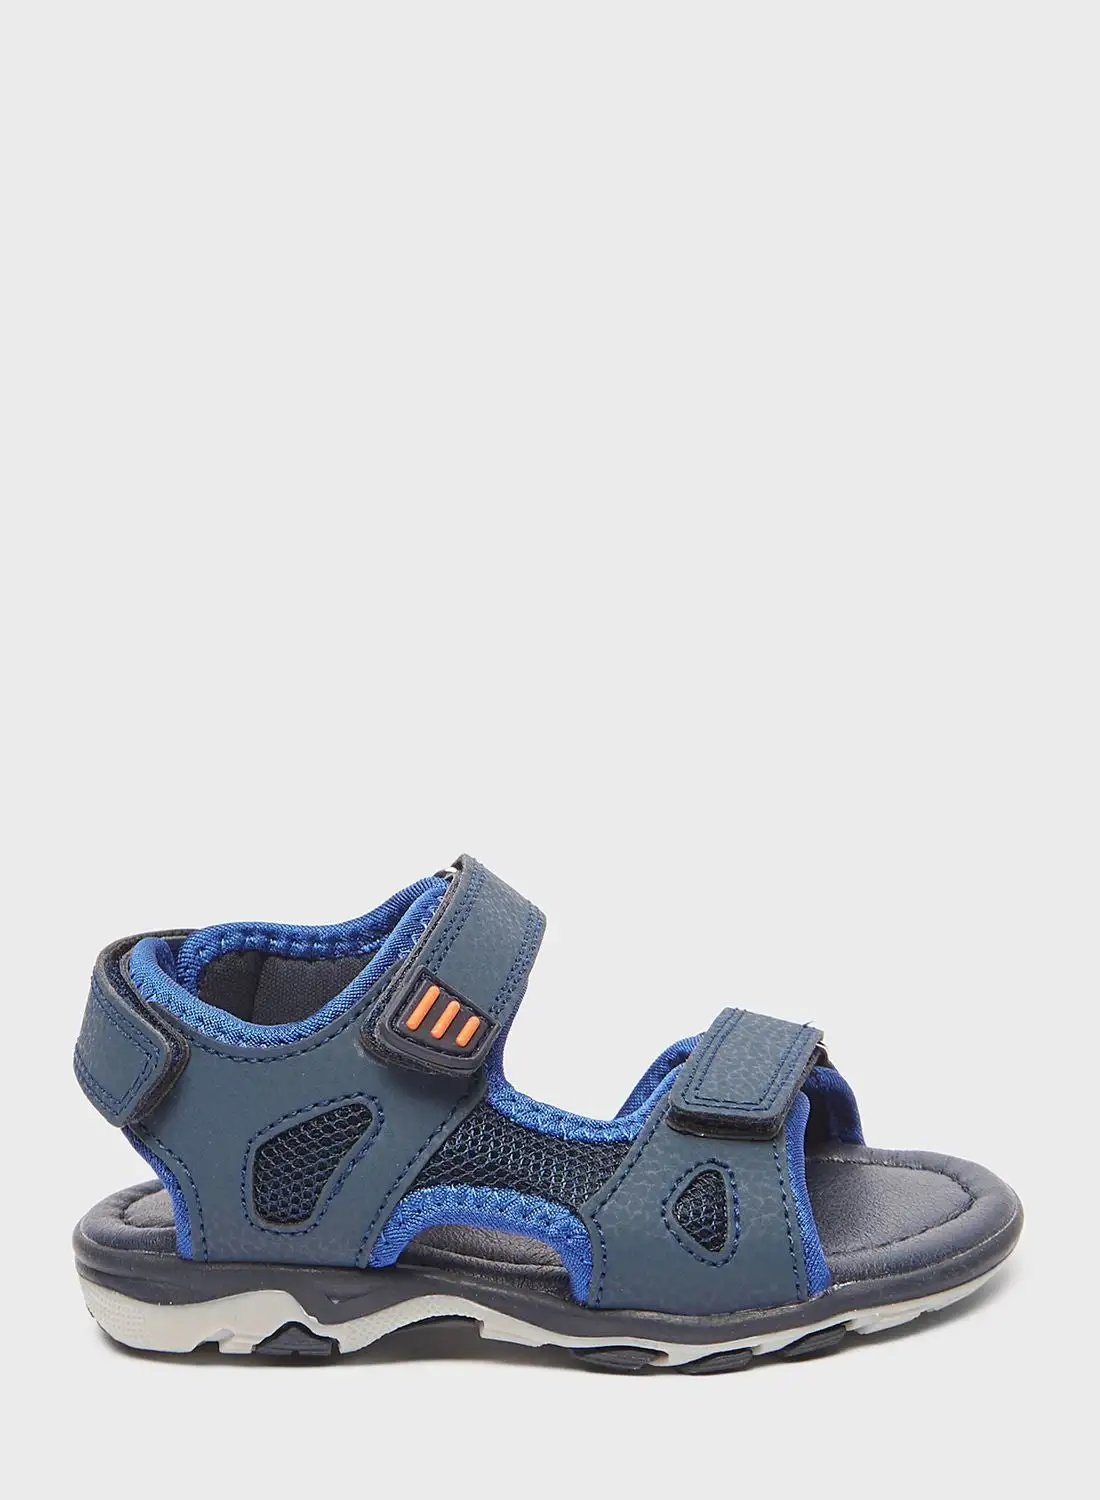 LBL by Shoexpress Kids Casual Sandals